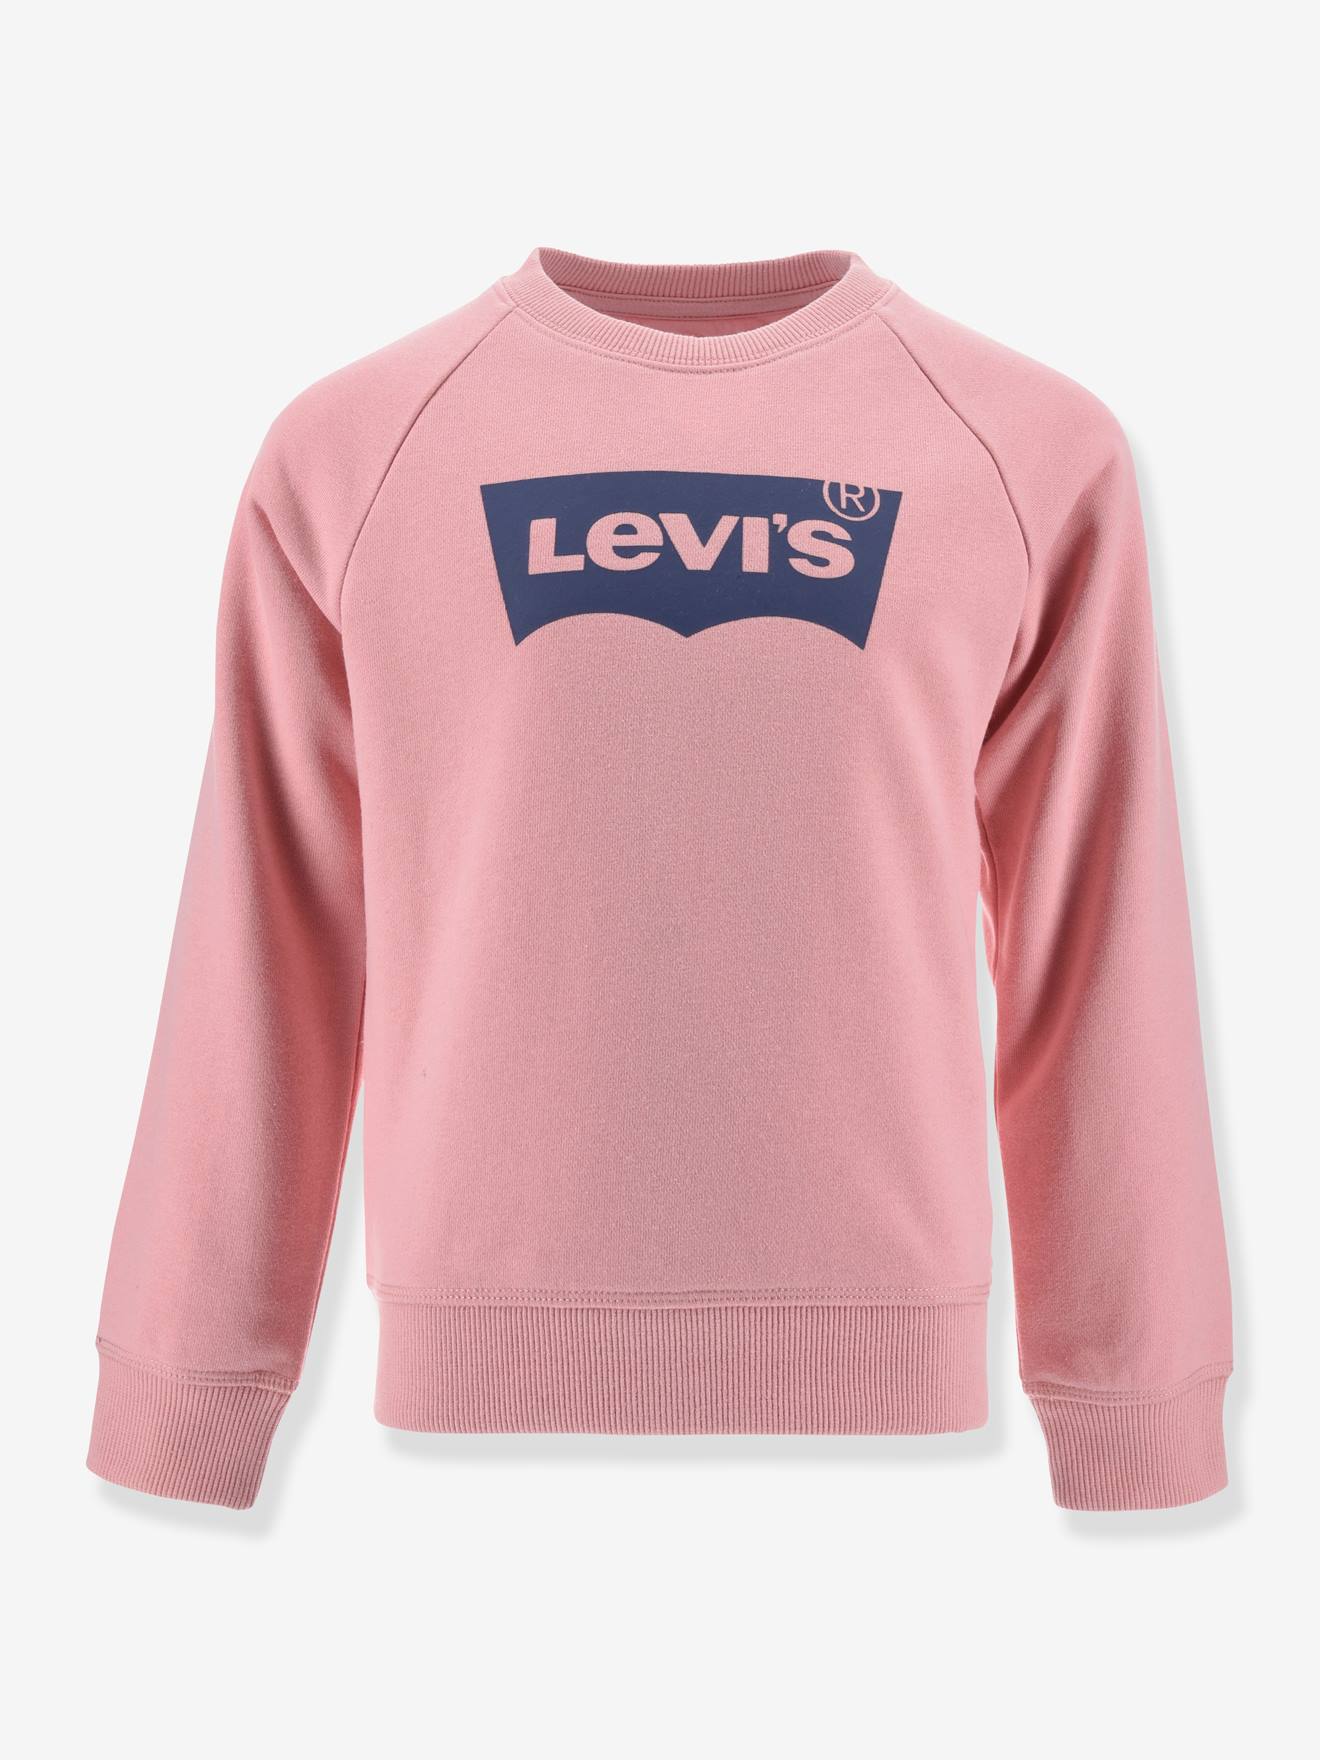 Batwing Jumper for Girls, by Levi’s(r) rose